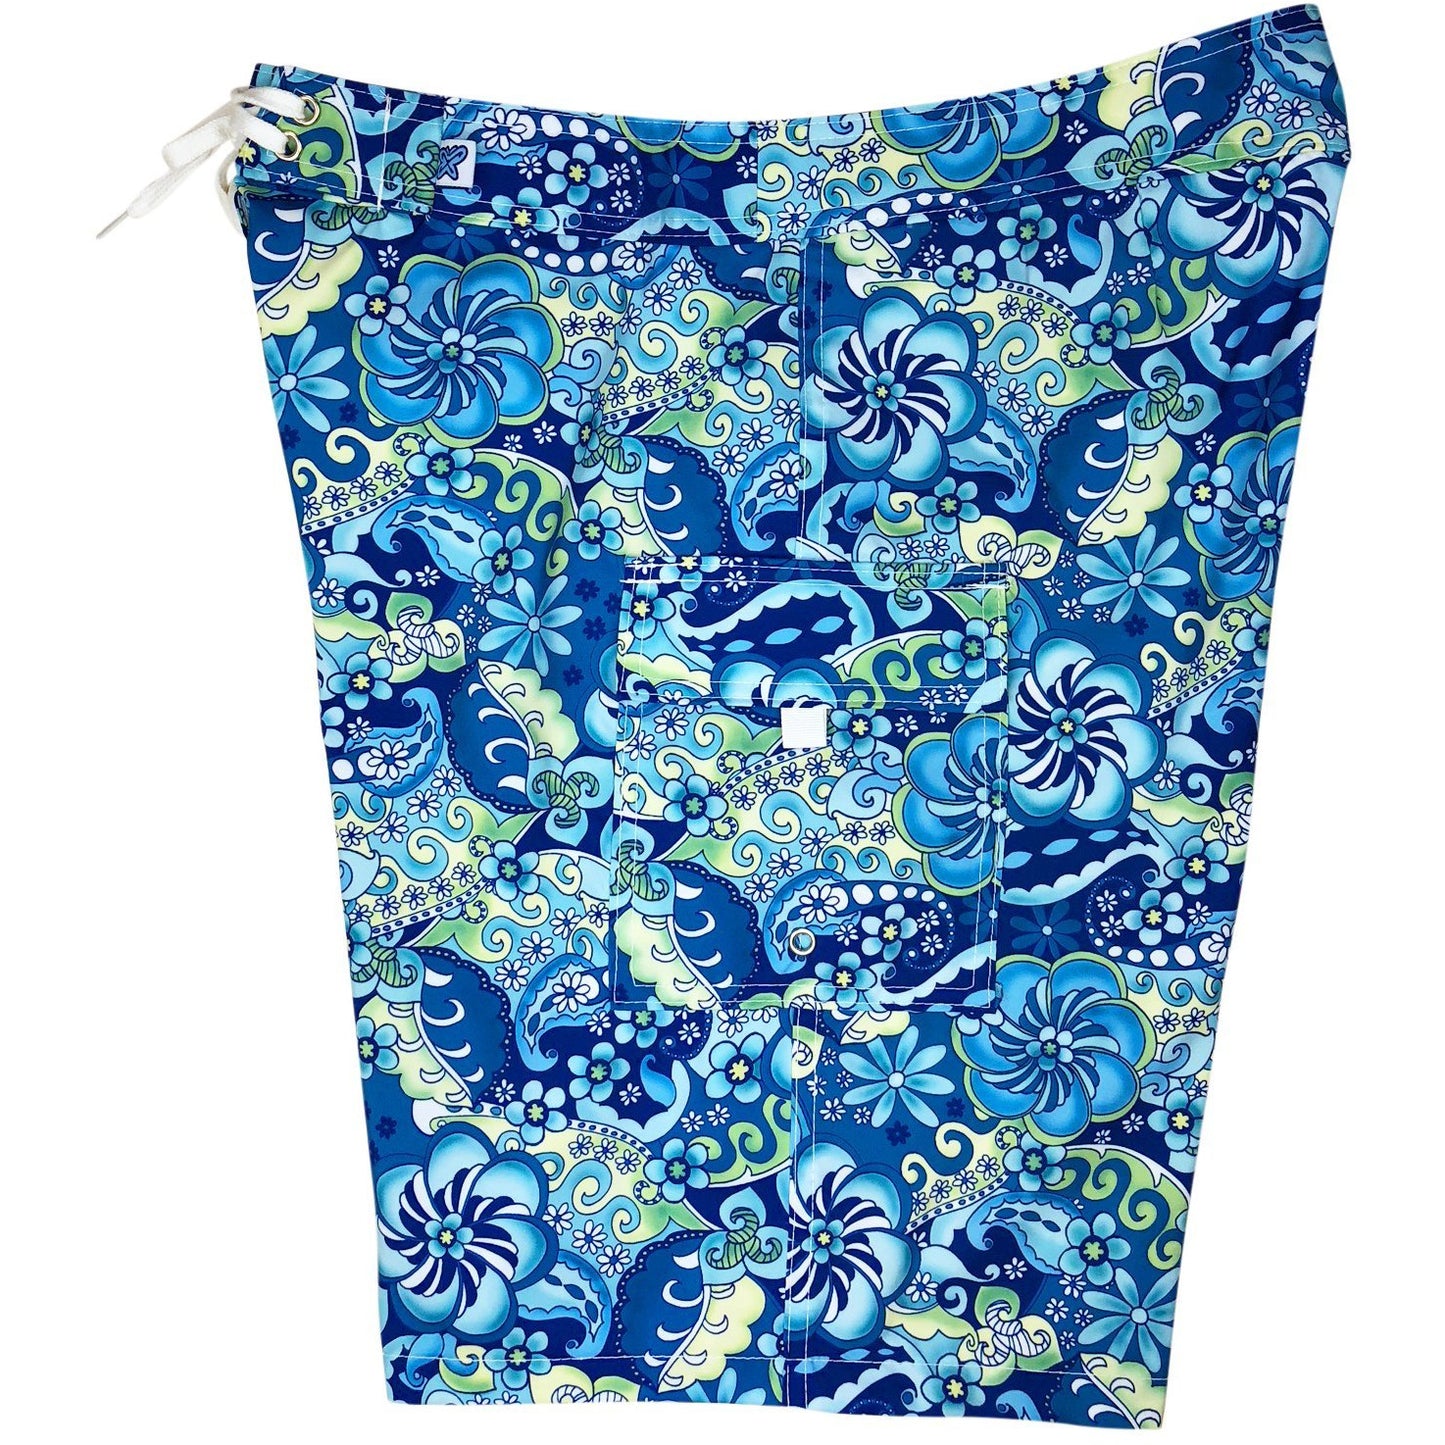 Fixed (Non Elastic) Waist Womens Board Shorts "Lucy in the Sky" (Blue) * CUSTOM *